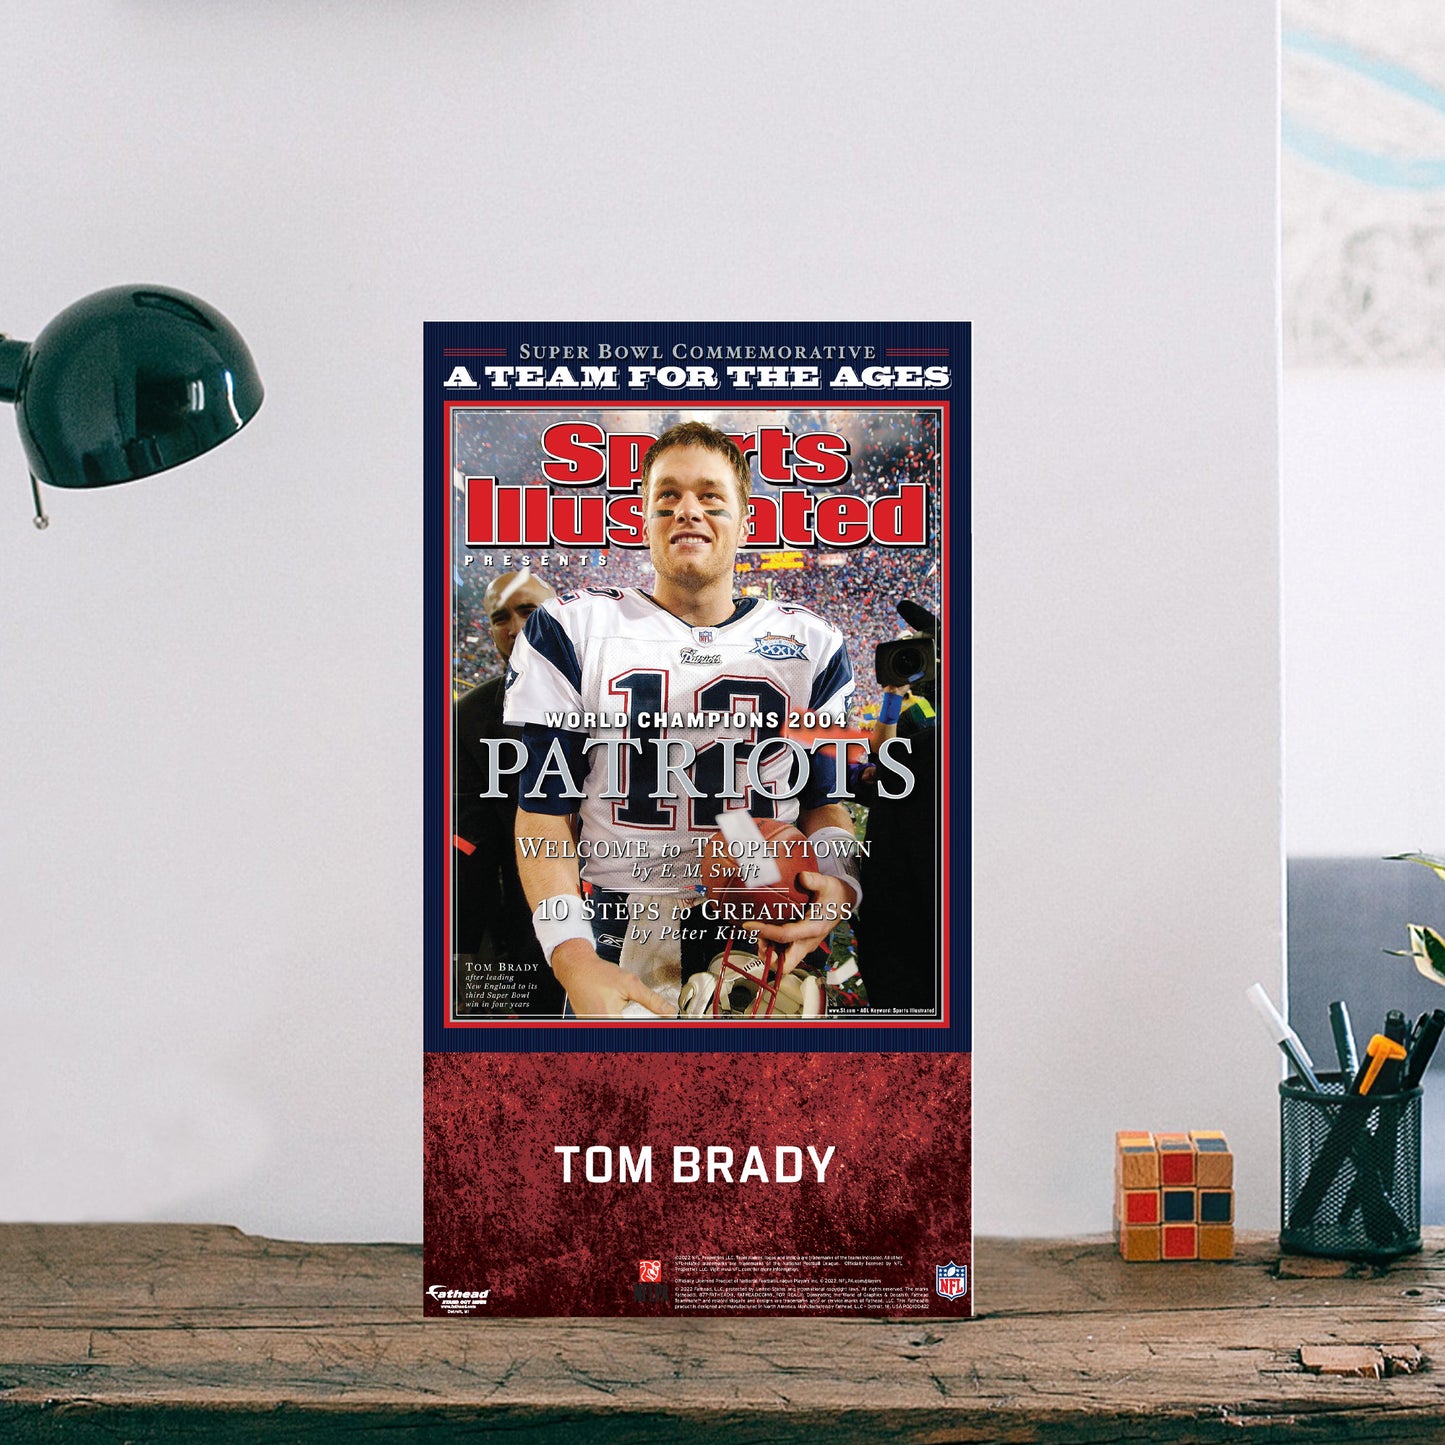 New England Patriots: Tom Brady Februrary 2005 Super Bowl XXXIX Commemorative Sports Illustrated Cover Mini Cardstock Cutout - Officially Licensed NFL Stand Out